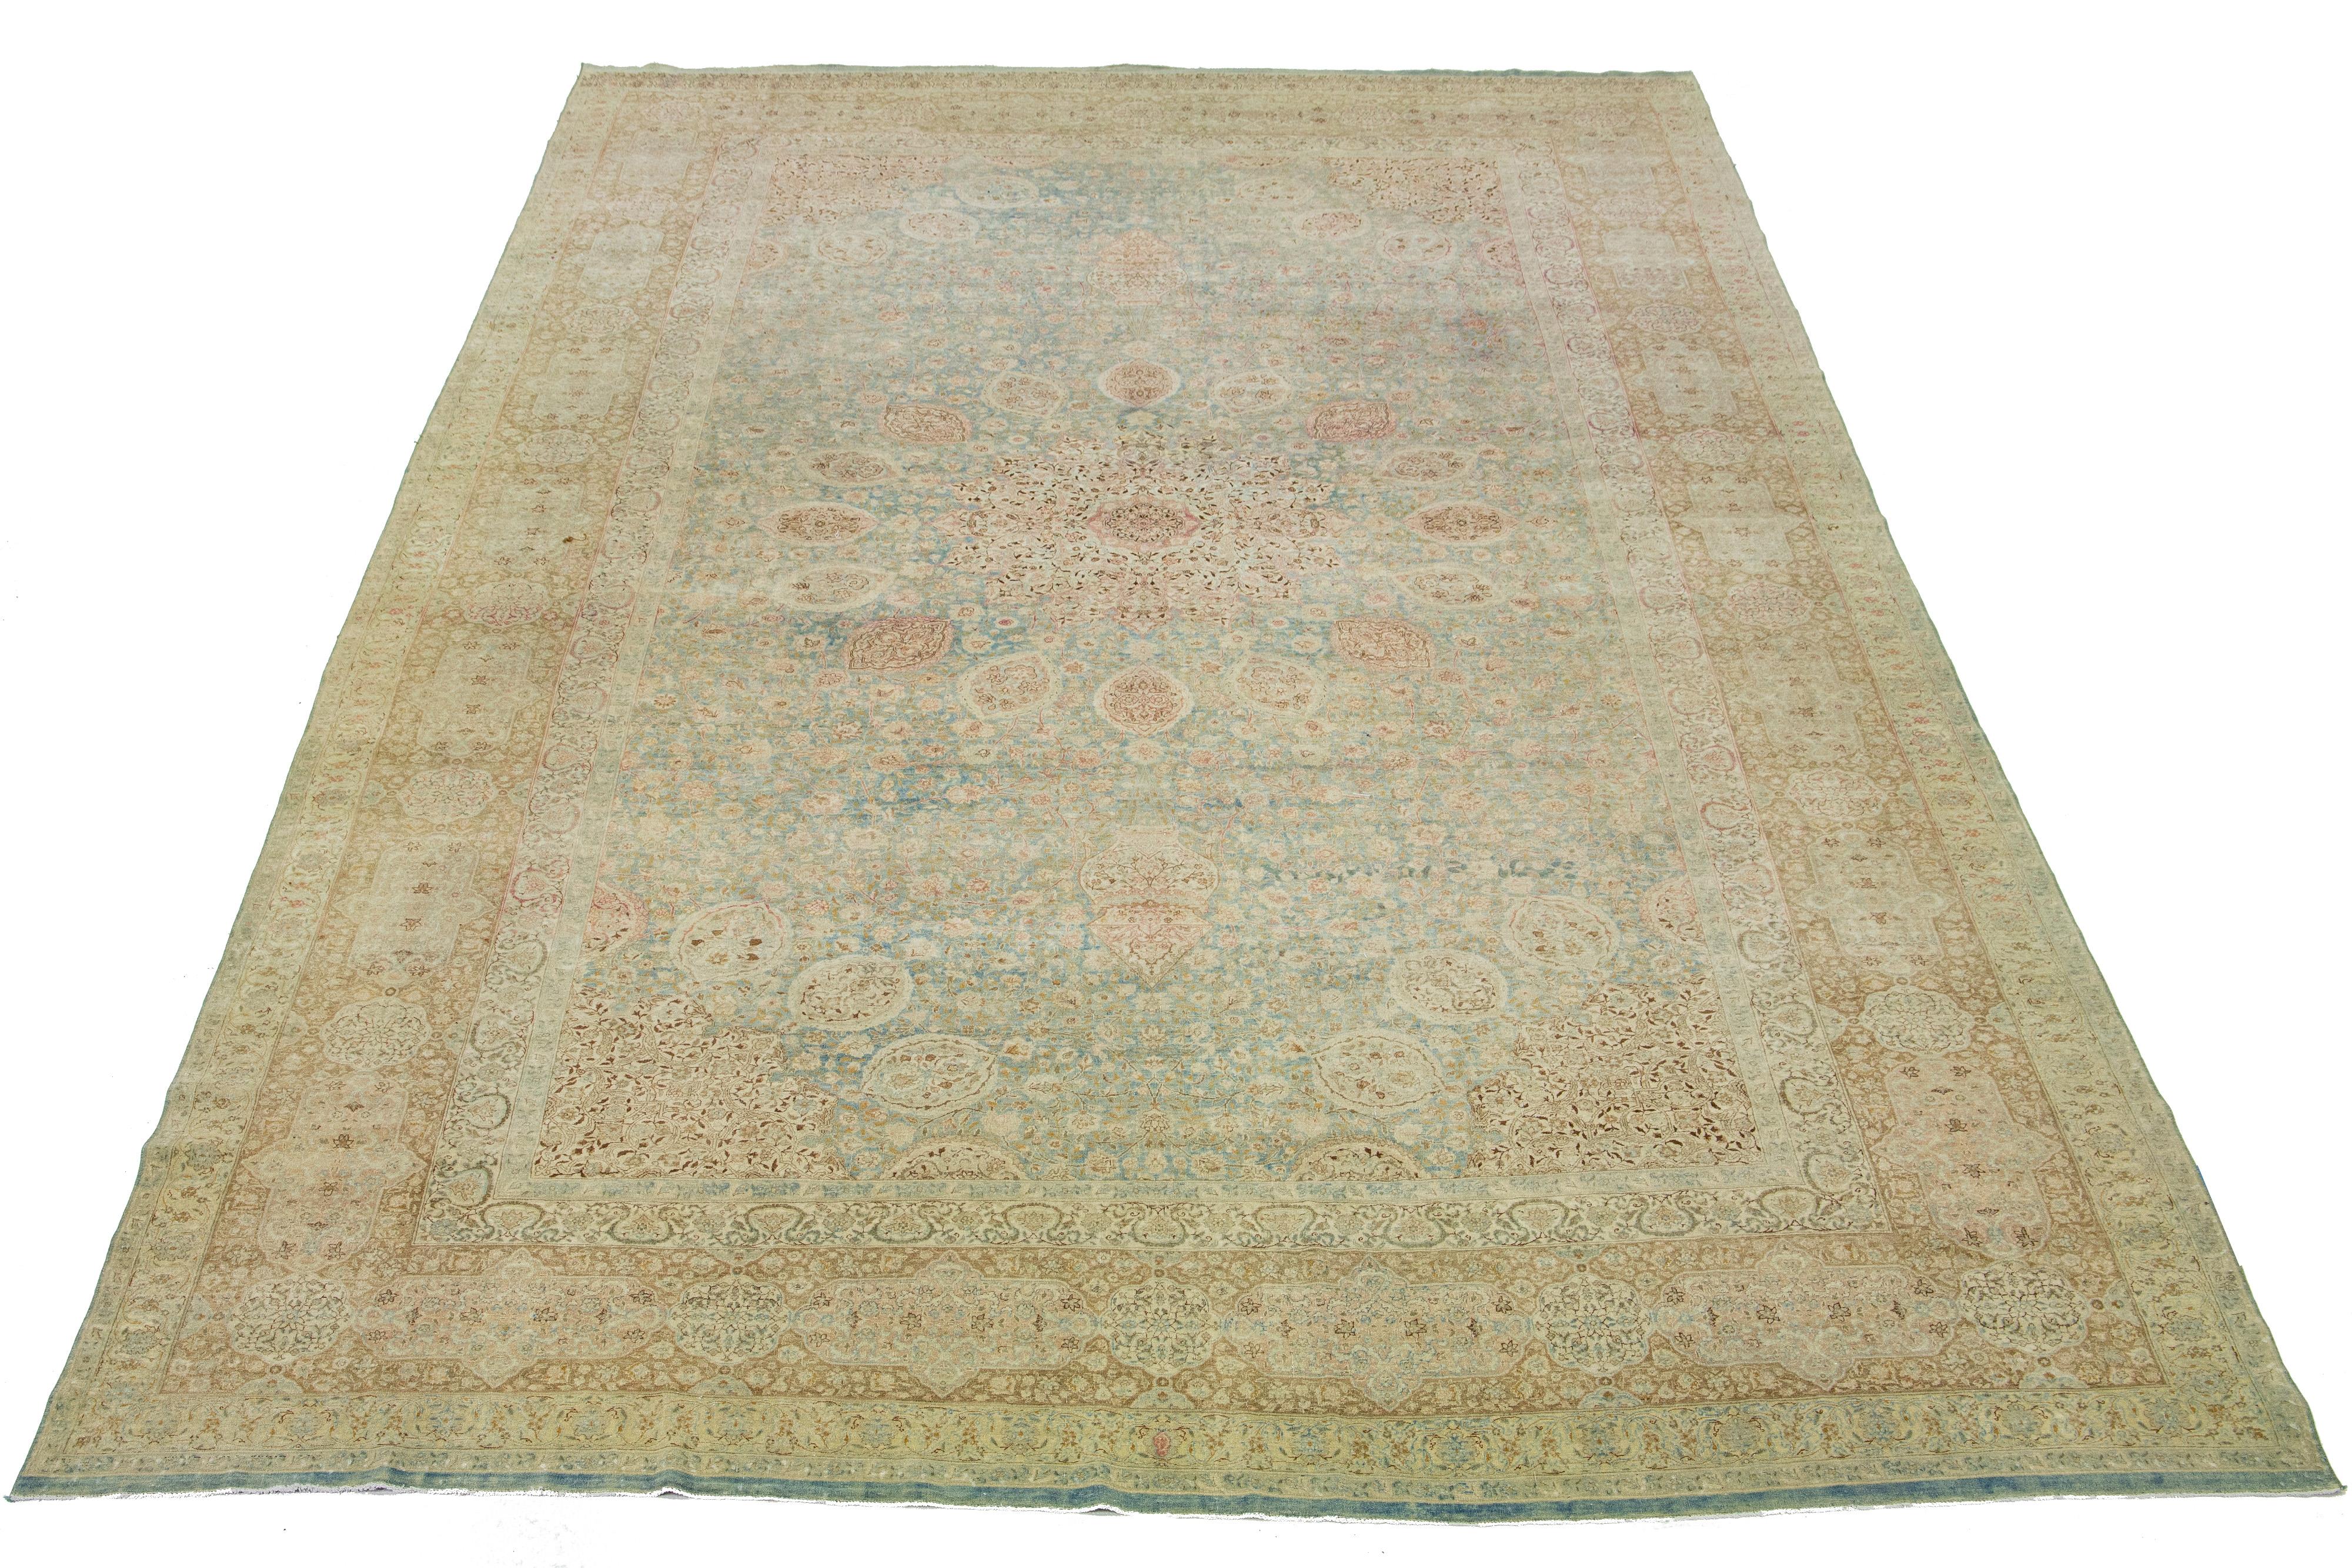 This exquisite, hand-knotted wool rug from Kerman boasts a charming antique finish. The rug's warm blue color field is adorned with a stunning, all-over floral pattern, highlighted by hints of rich beige and peach—a remarkable piece of Persian